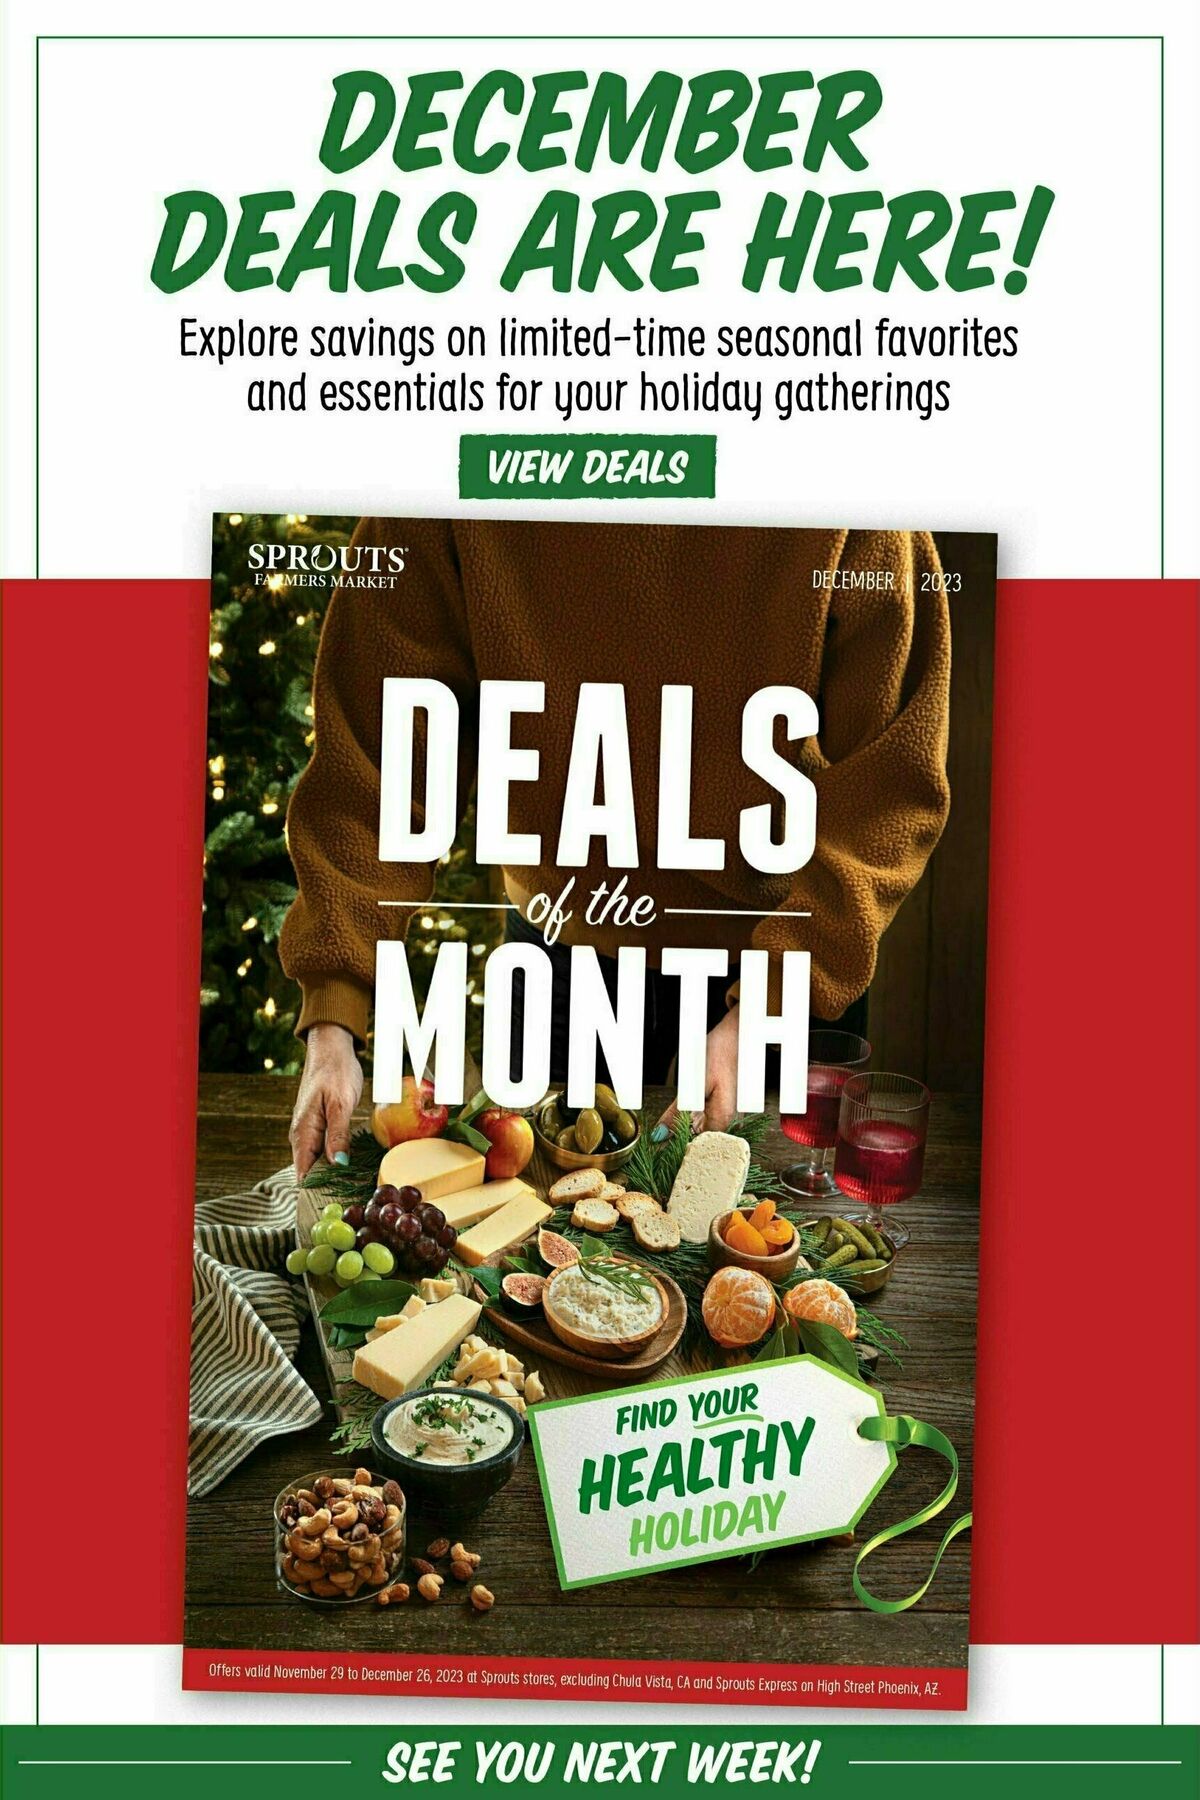 Sprouts Farmers Market Weekly Ad from December 6